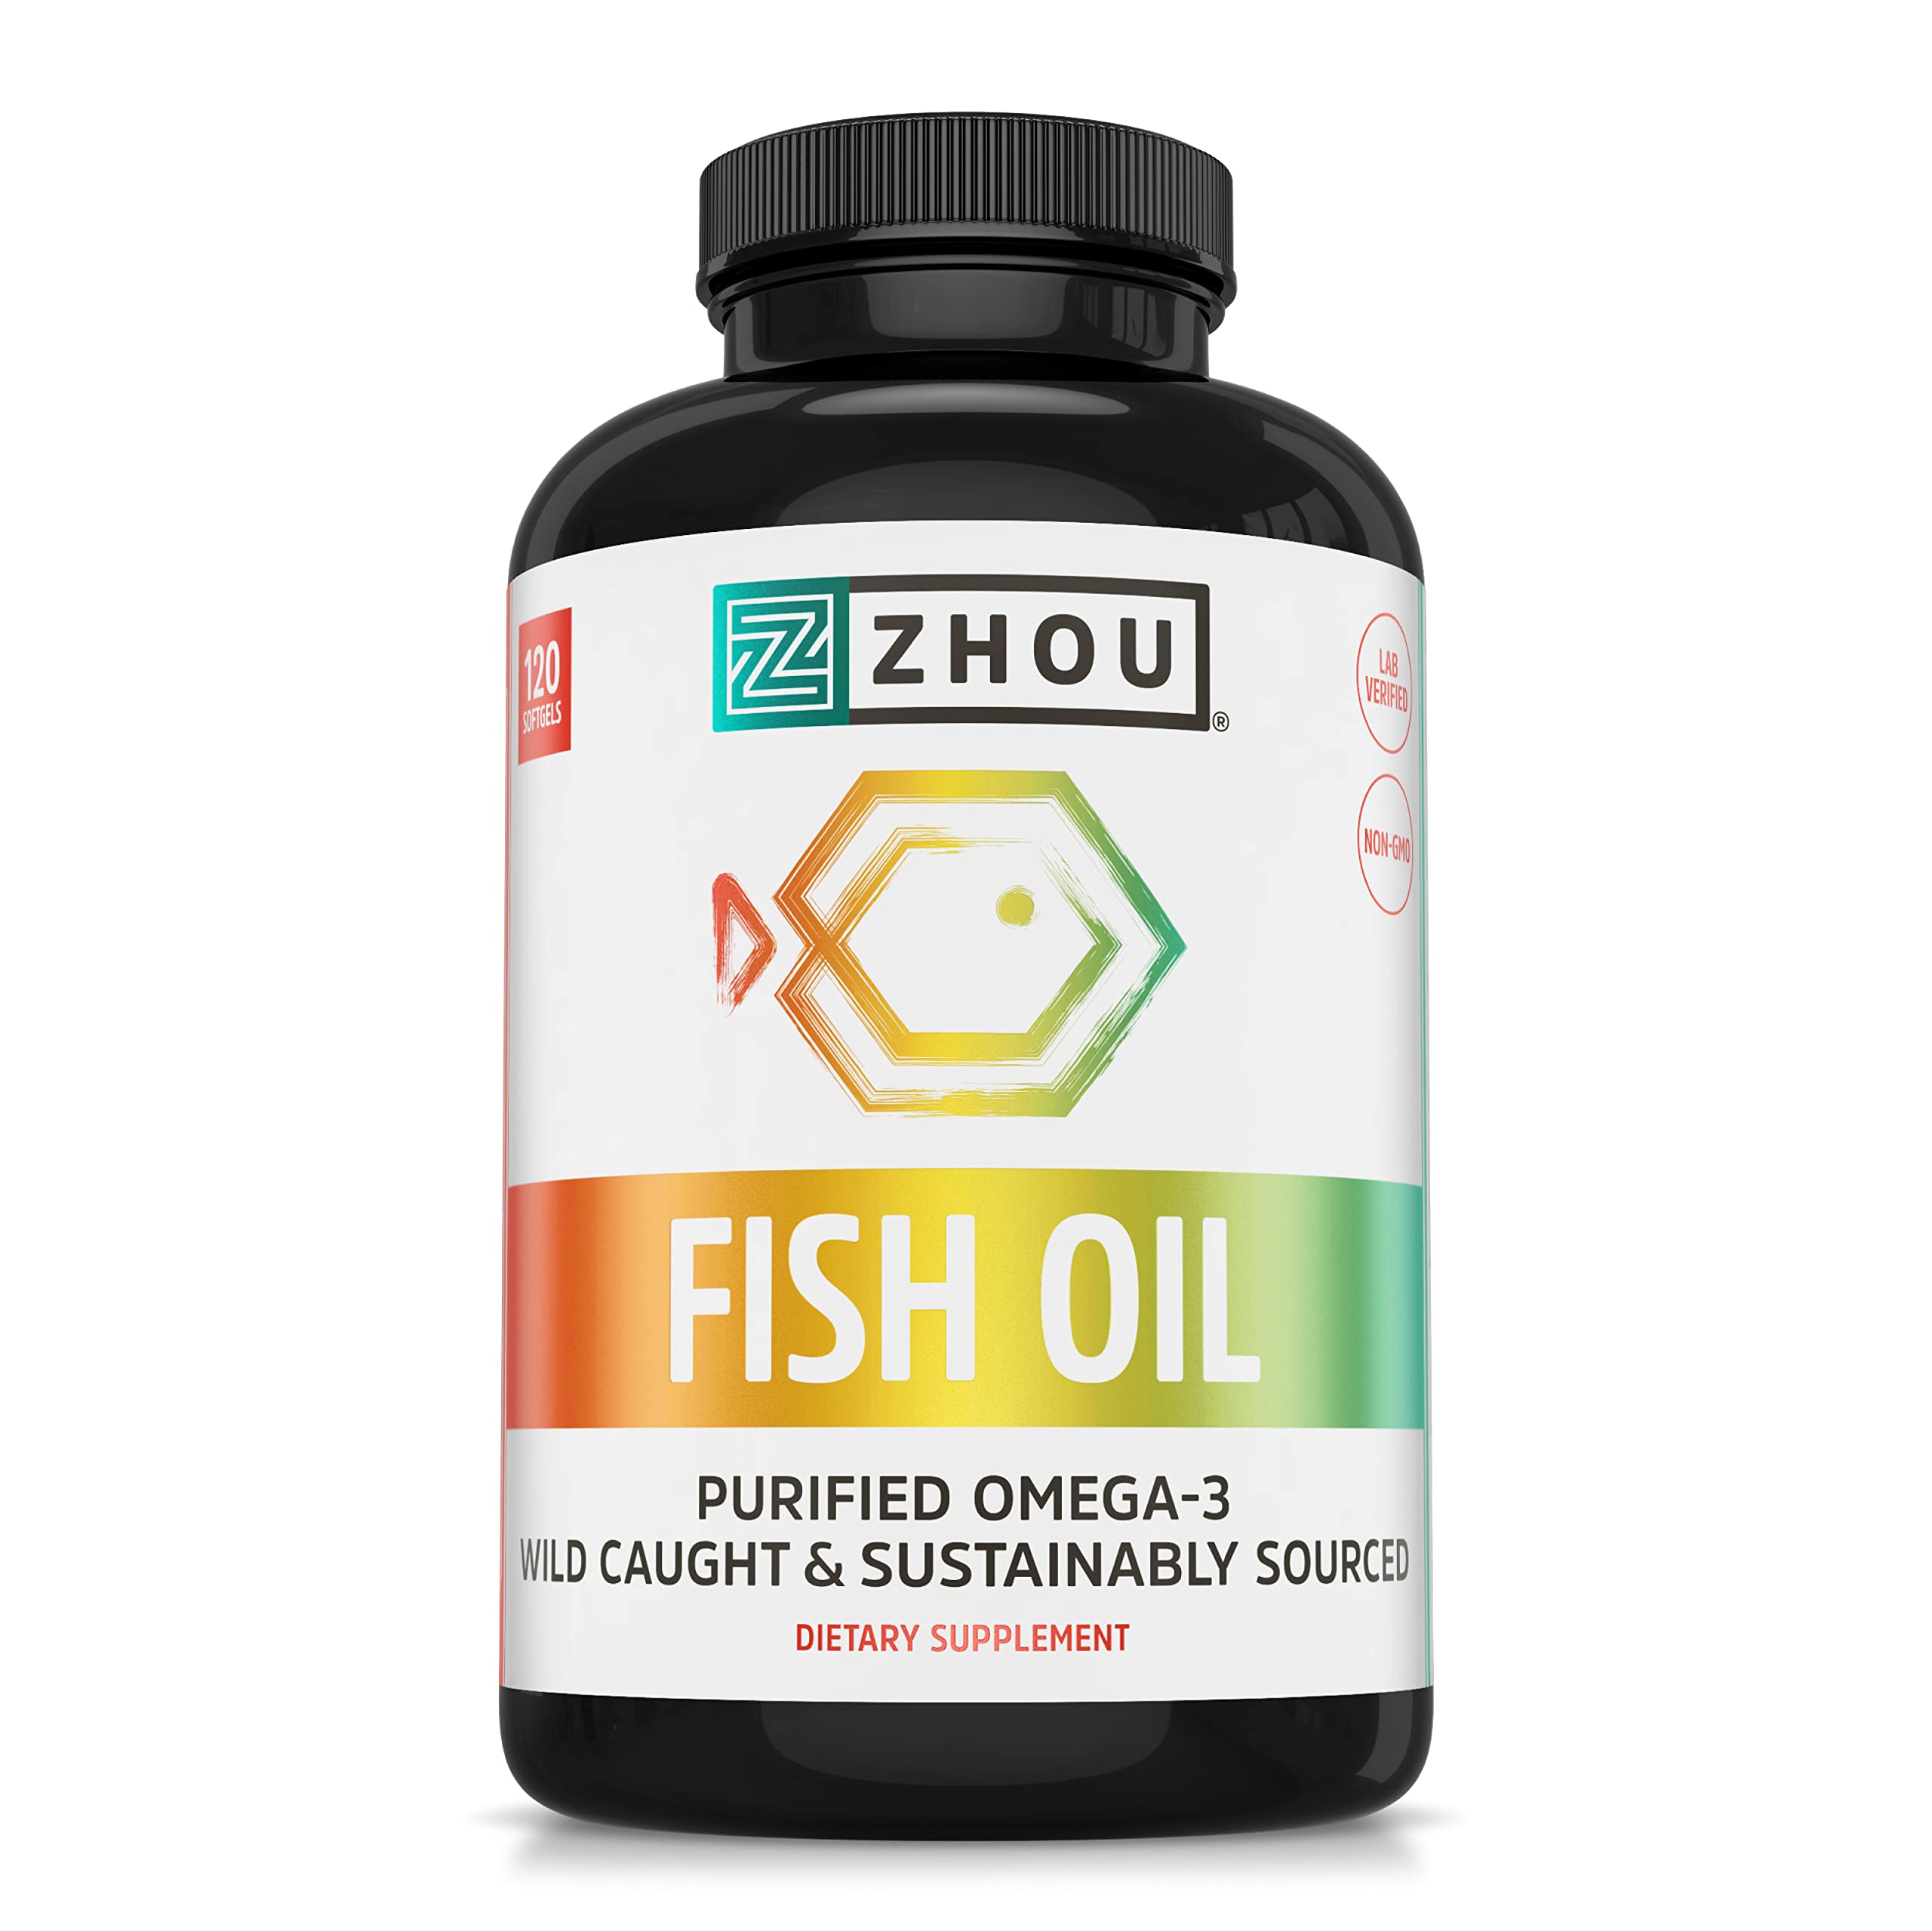 Zhou Nutrition Fish Oil, Max Strength Omega 3 Fish Oil, 120 Servings, 1250 mg with EPA and DHA, Purified, Sustainably Sourced Fish Oil, Heart, Joint and Brain Health, Burpless Softgels, 4 Month Supply